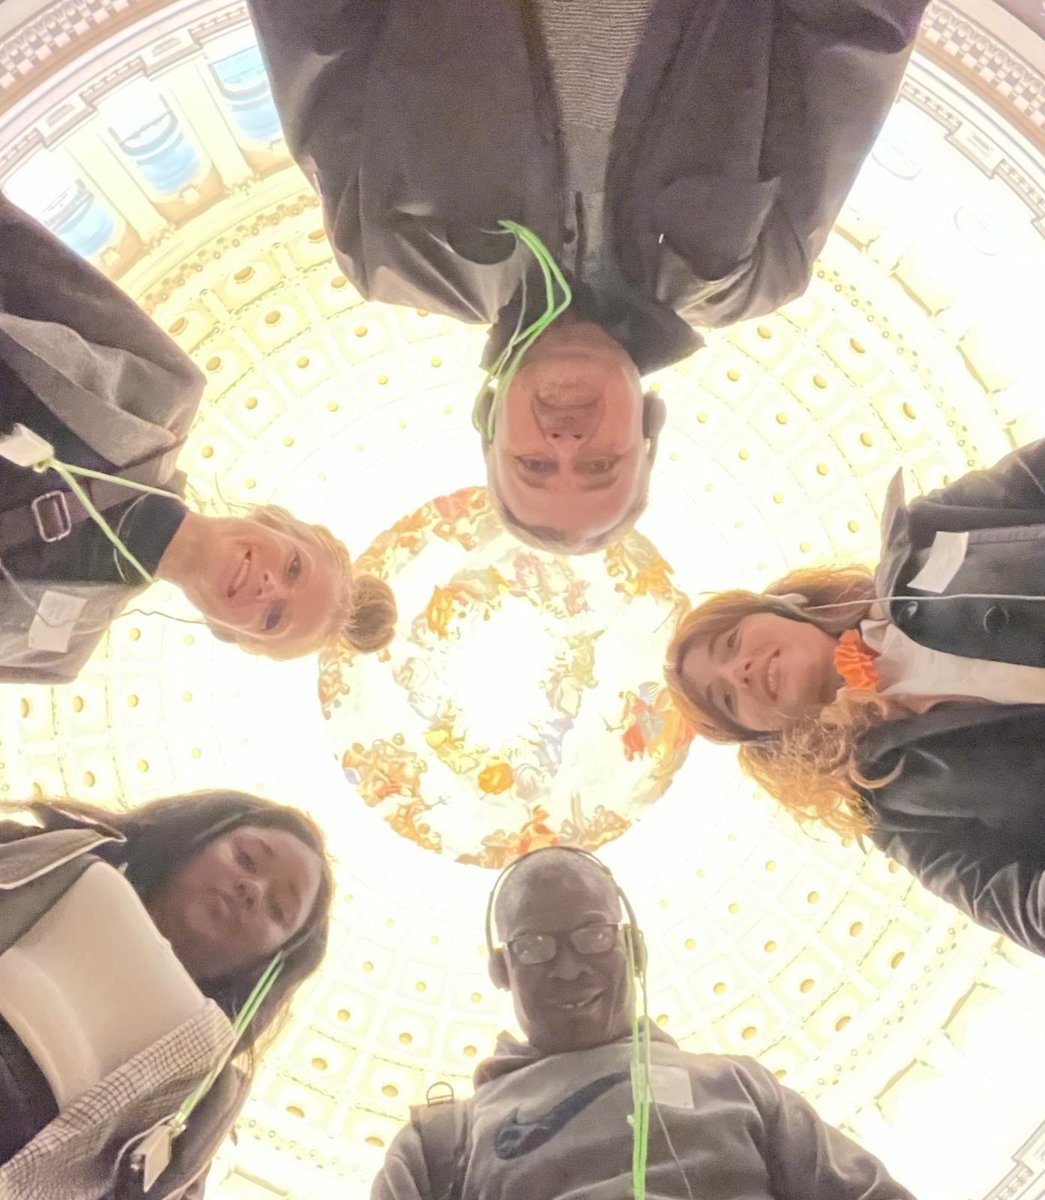 ISN sponsored @JamesMartinCNS Visiting Fellows from Belize, Georgia, Kenya + Ukraine to exchange CBRN priorities at @StateDept, @NTI_WMD, @ArmsControlNow, @theNASciences and @UNODA. Connections with generations of Fellows create strong bonds to meet international challenges.